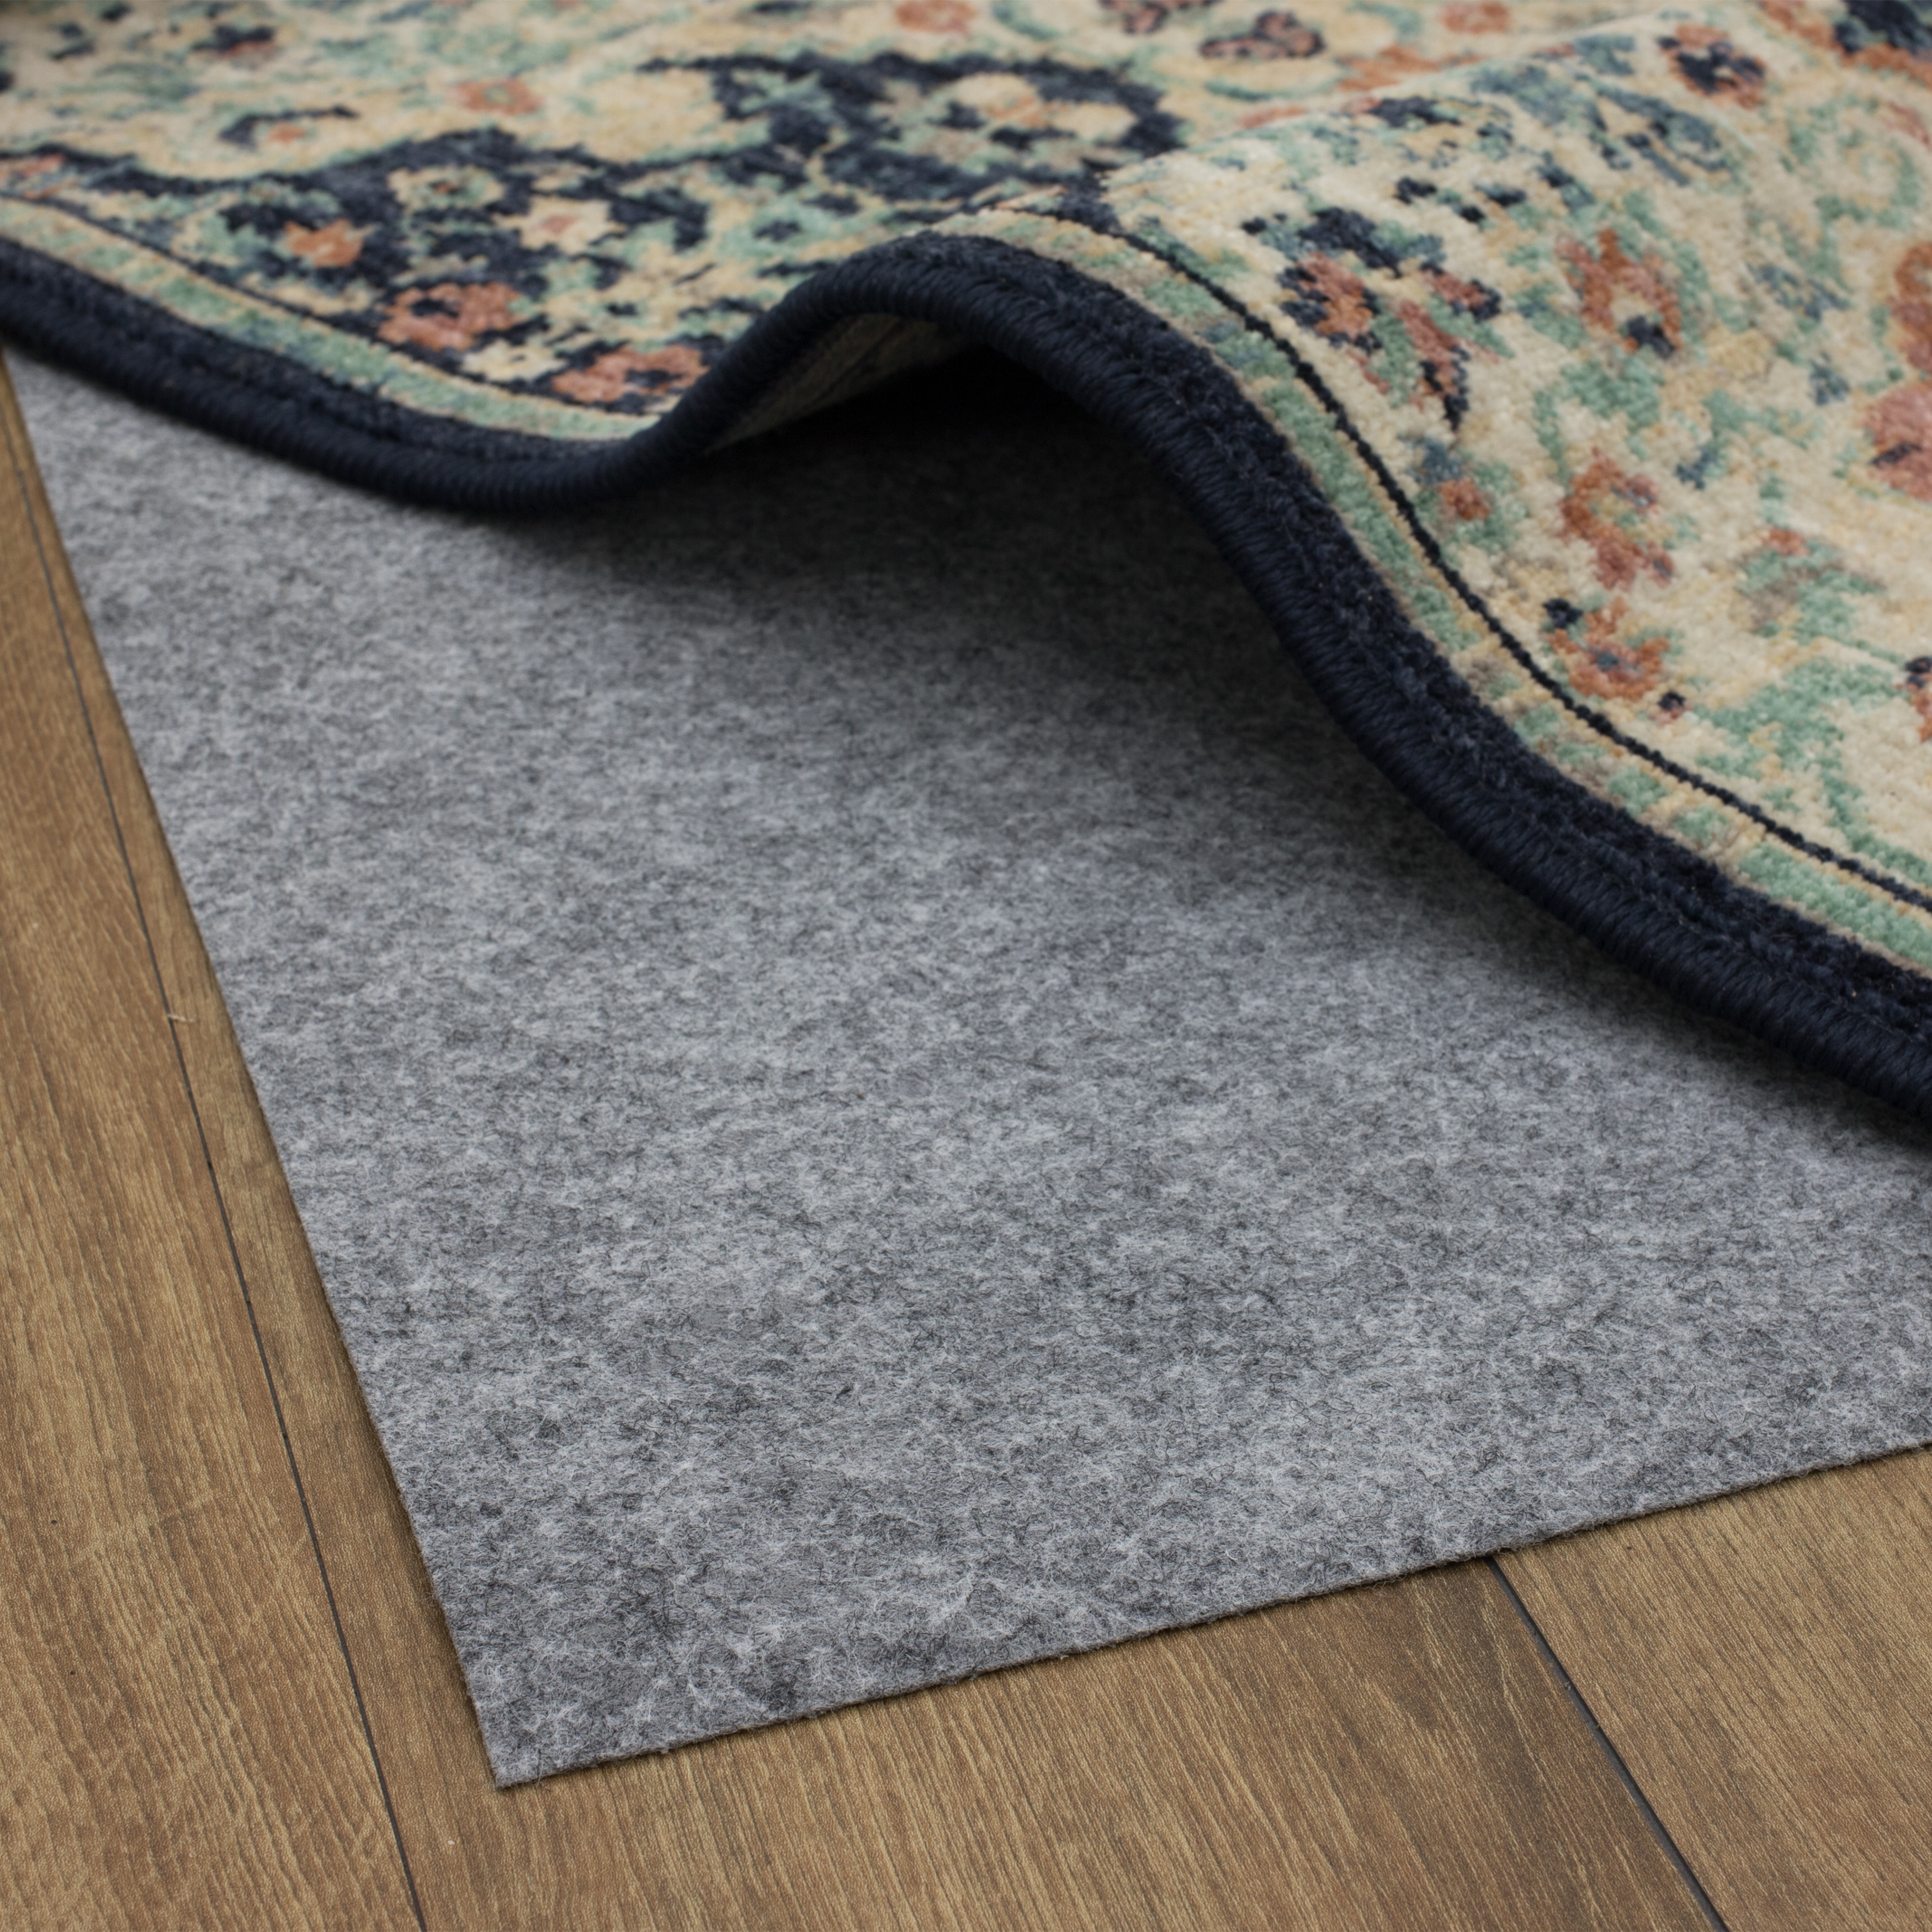 https://ak1.ostkcdn.com/images/products/is/images/direct/050120080b377964f915a045a930ee6ed9245146/Mohawk-Home-Pet-Friendly-Dual-Surface-Rug-Pad.jpg